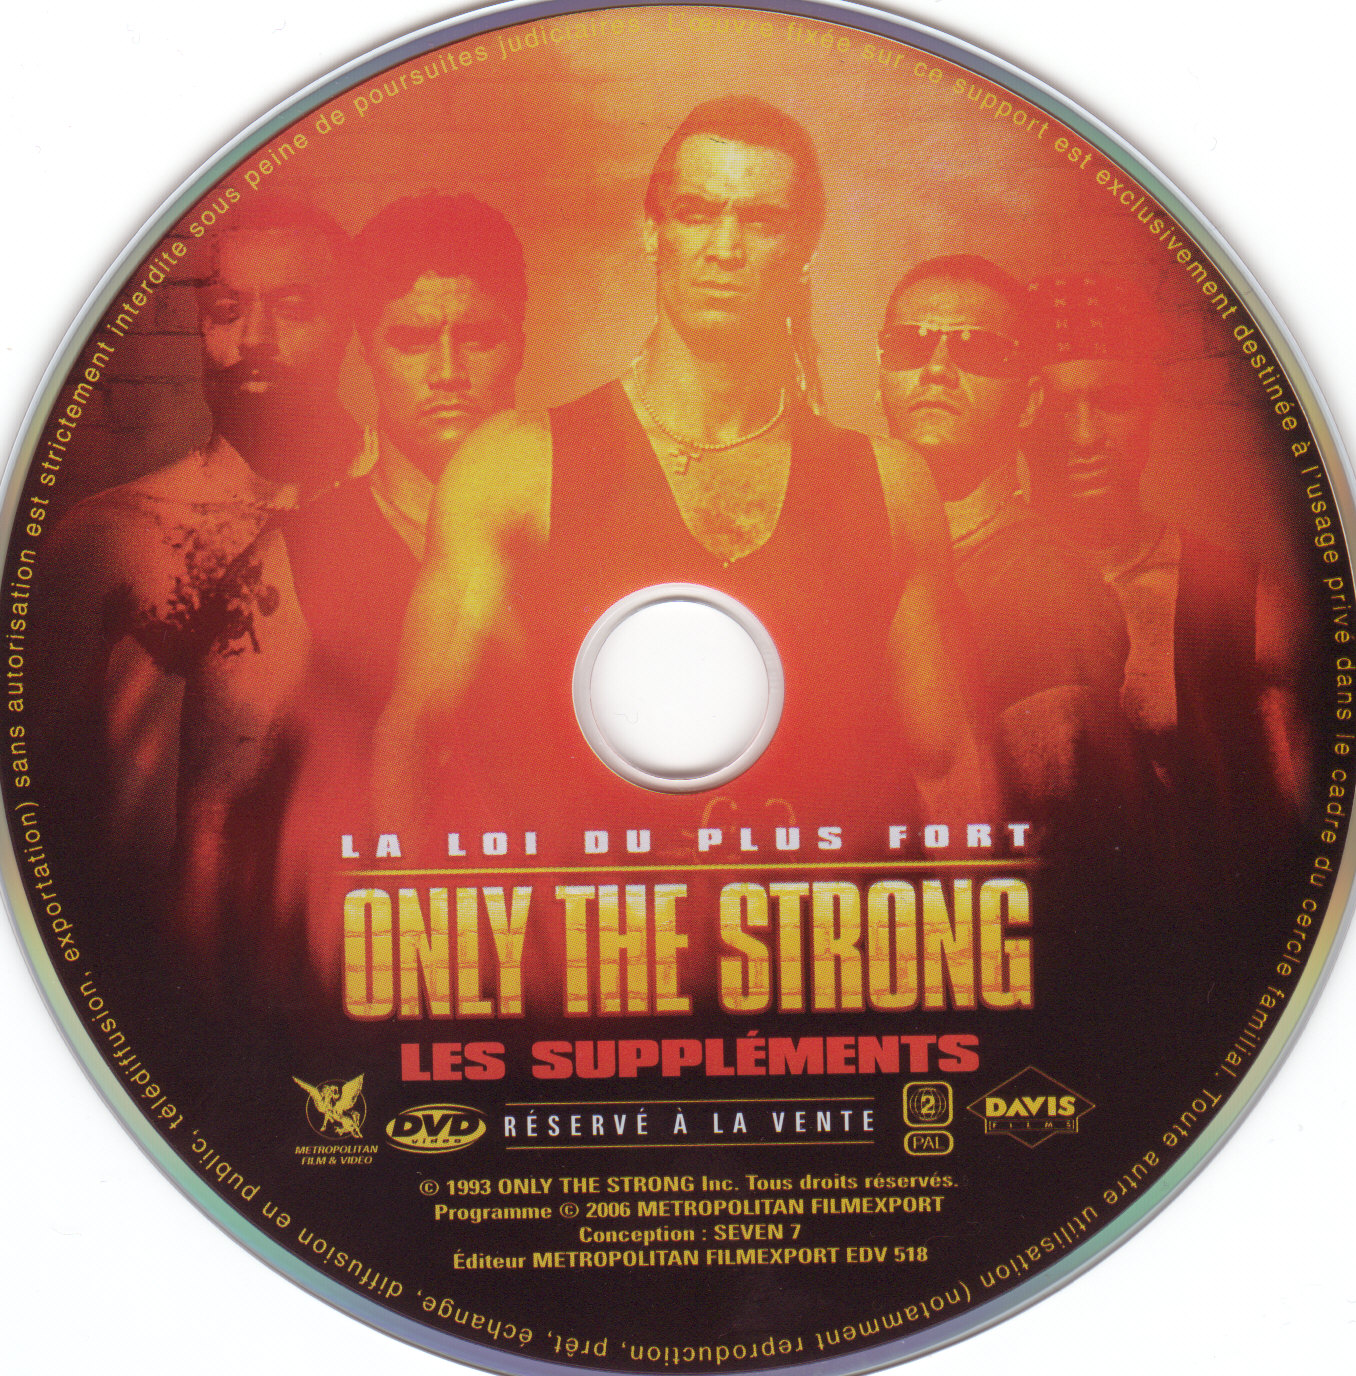 Only the strong DISC 2